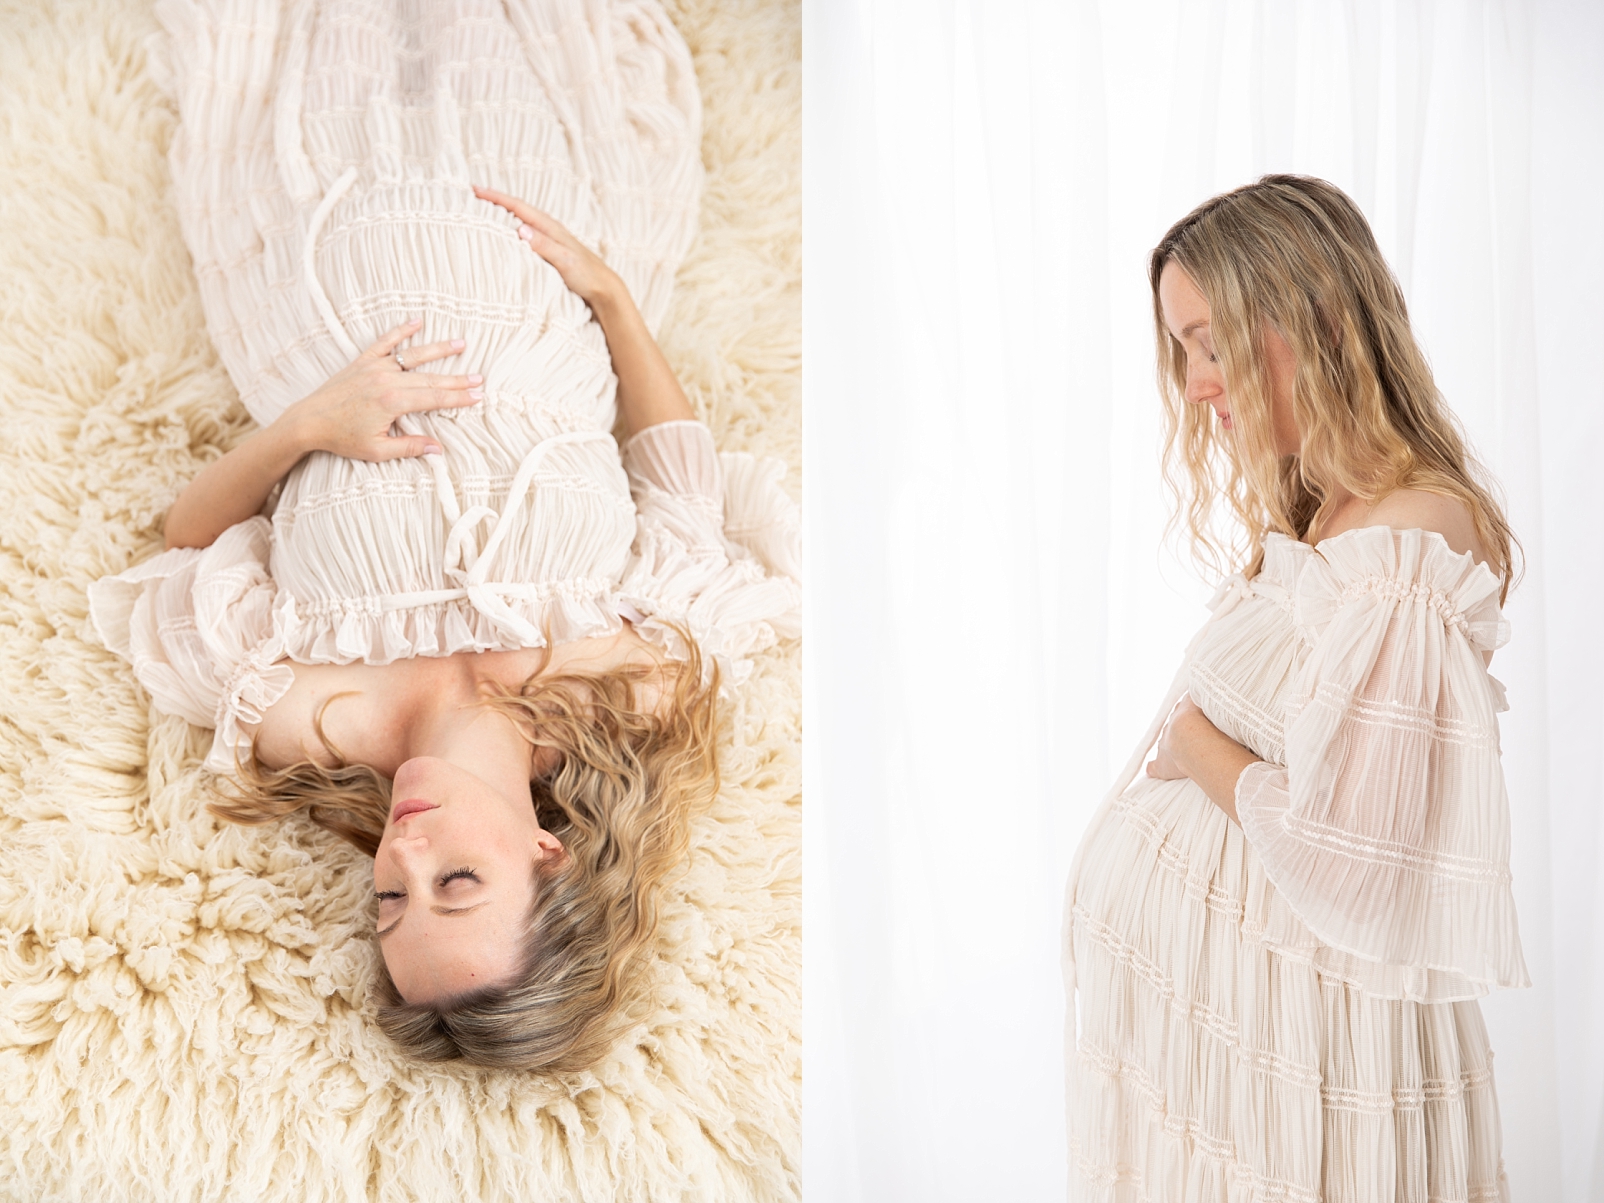 Pregnant mother lying on a flokati in a textured gown Ellicott City Maternity Photographer | Rebecca Leigh Photography


